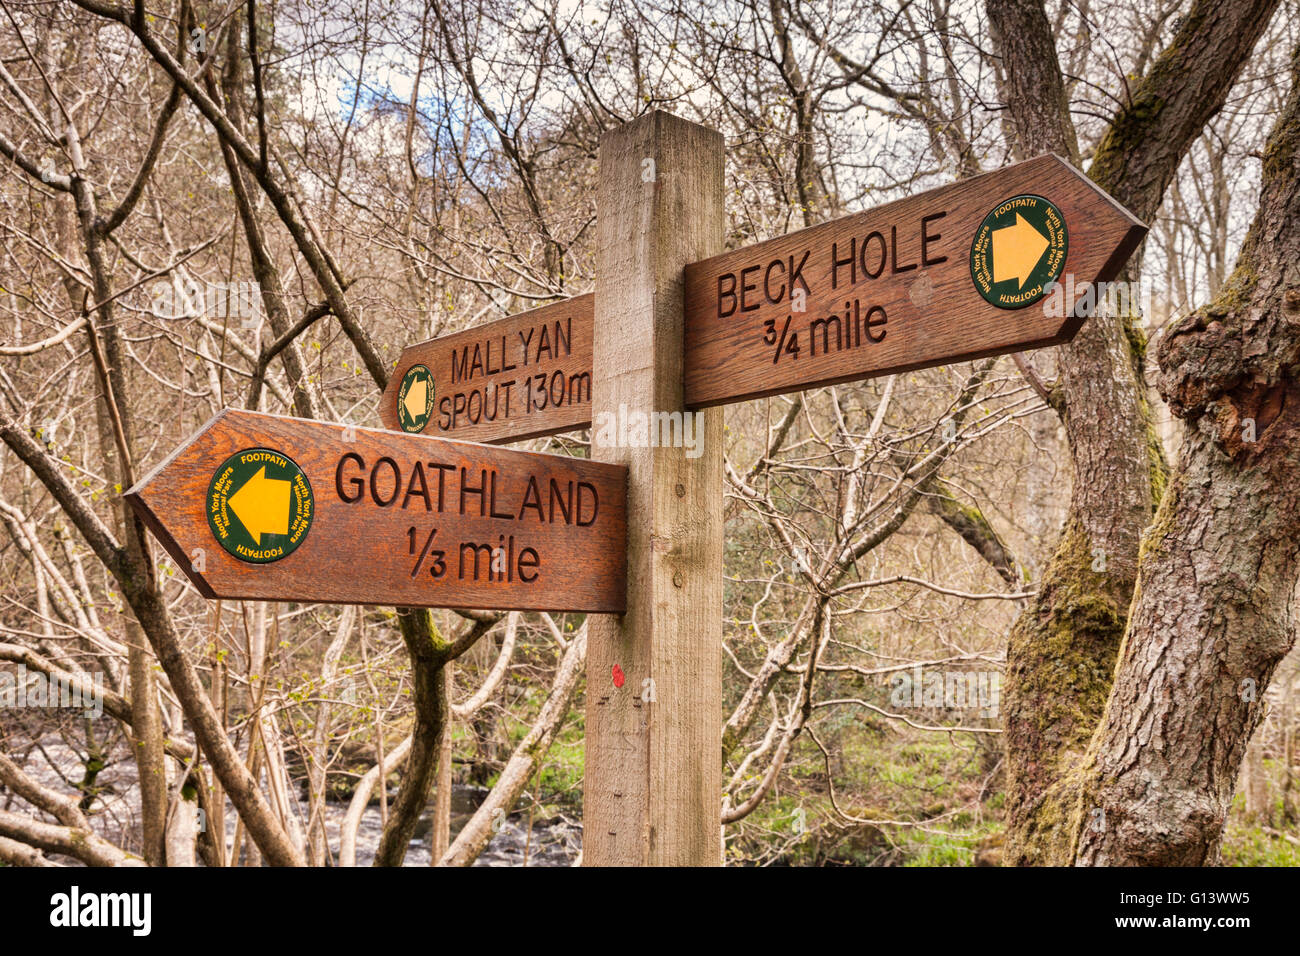 Footpath sign in the North York Moors National Park, pointing to Goathland, Mallyan Spout and Beck Hole Stock Photo